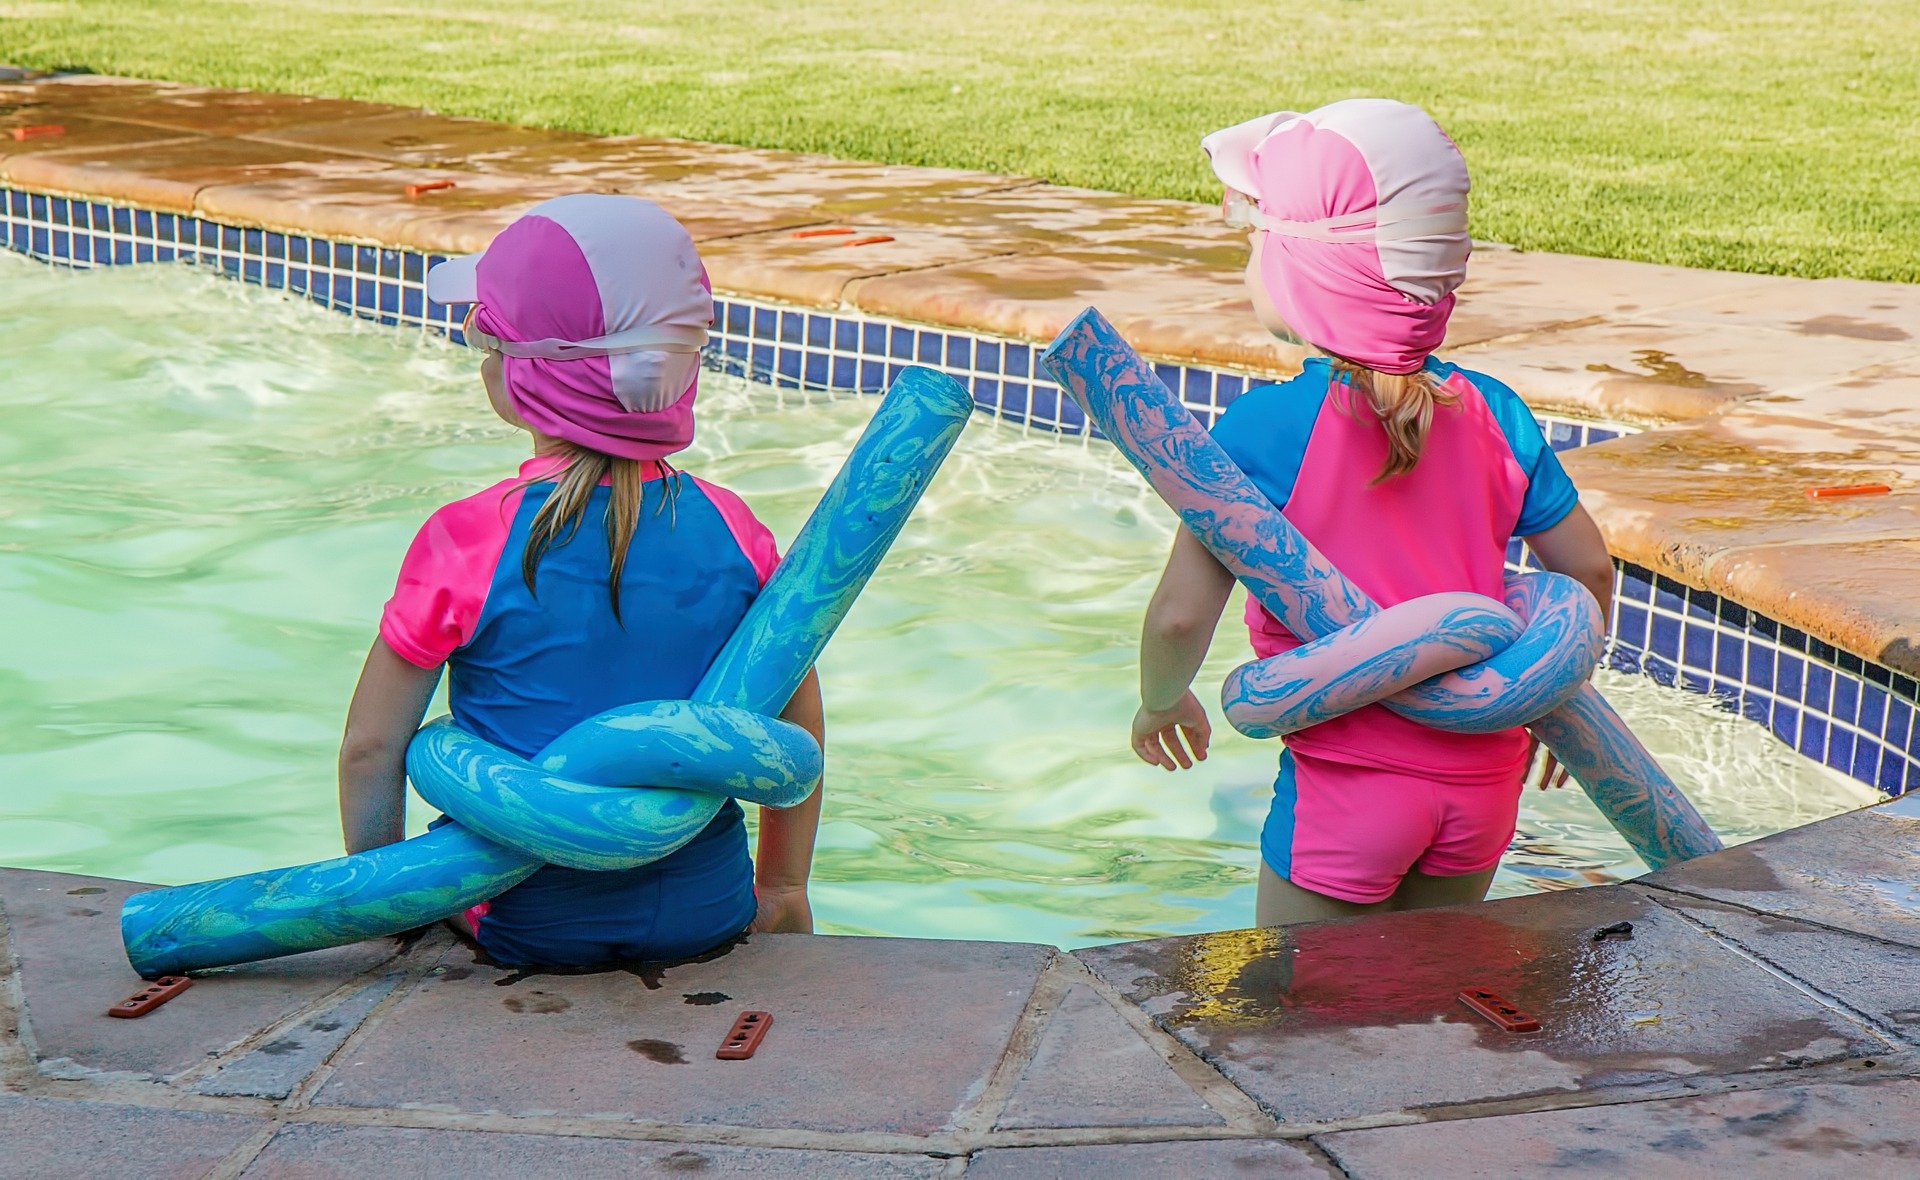 children with pool noodles for safety